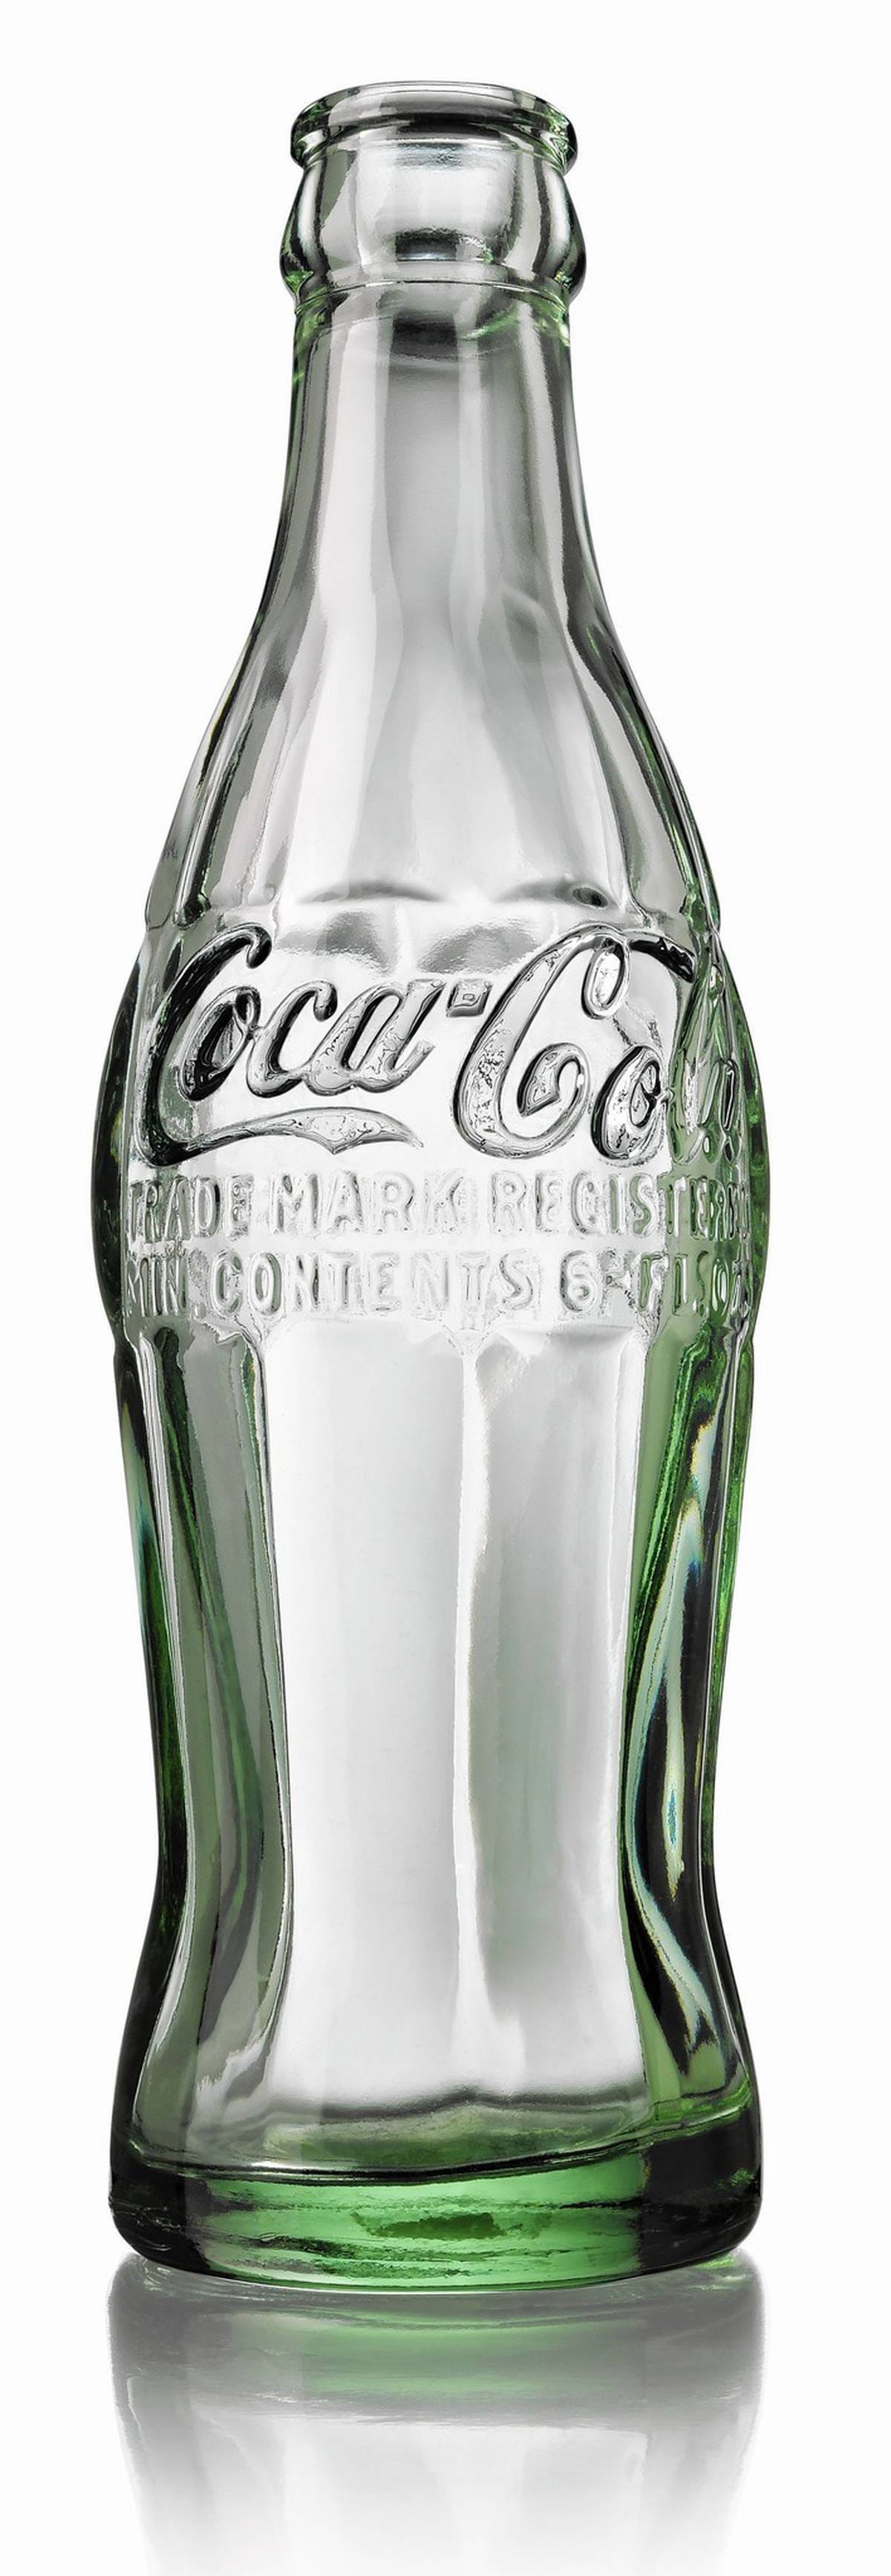 Coca-Cola bottle approaching its 100th birthday – Chicago Tribune